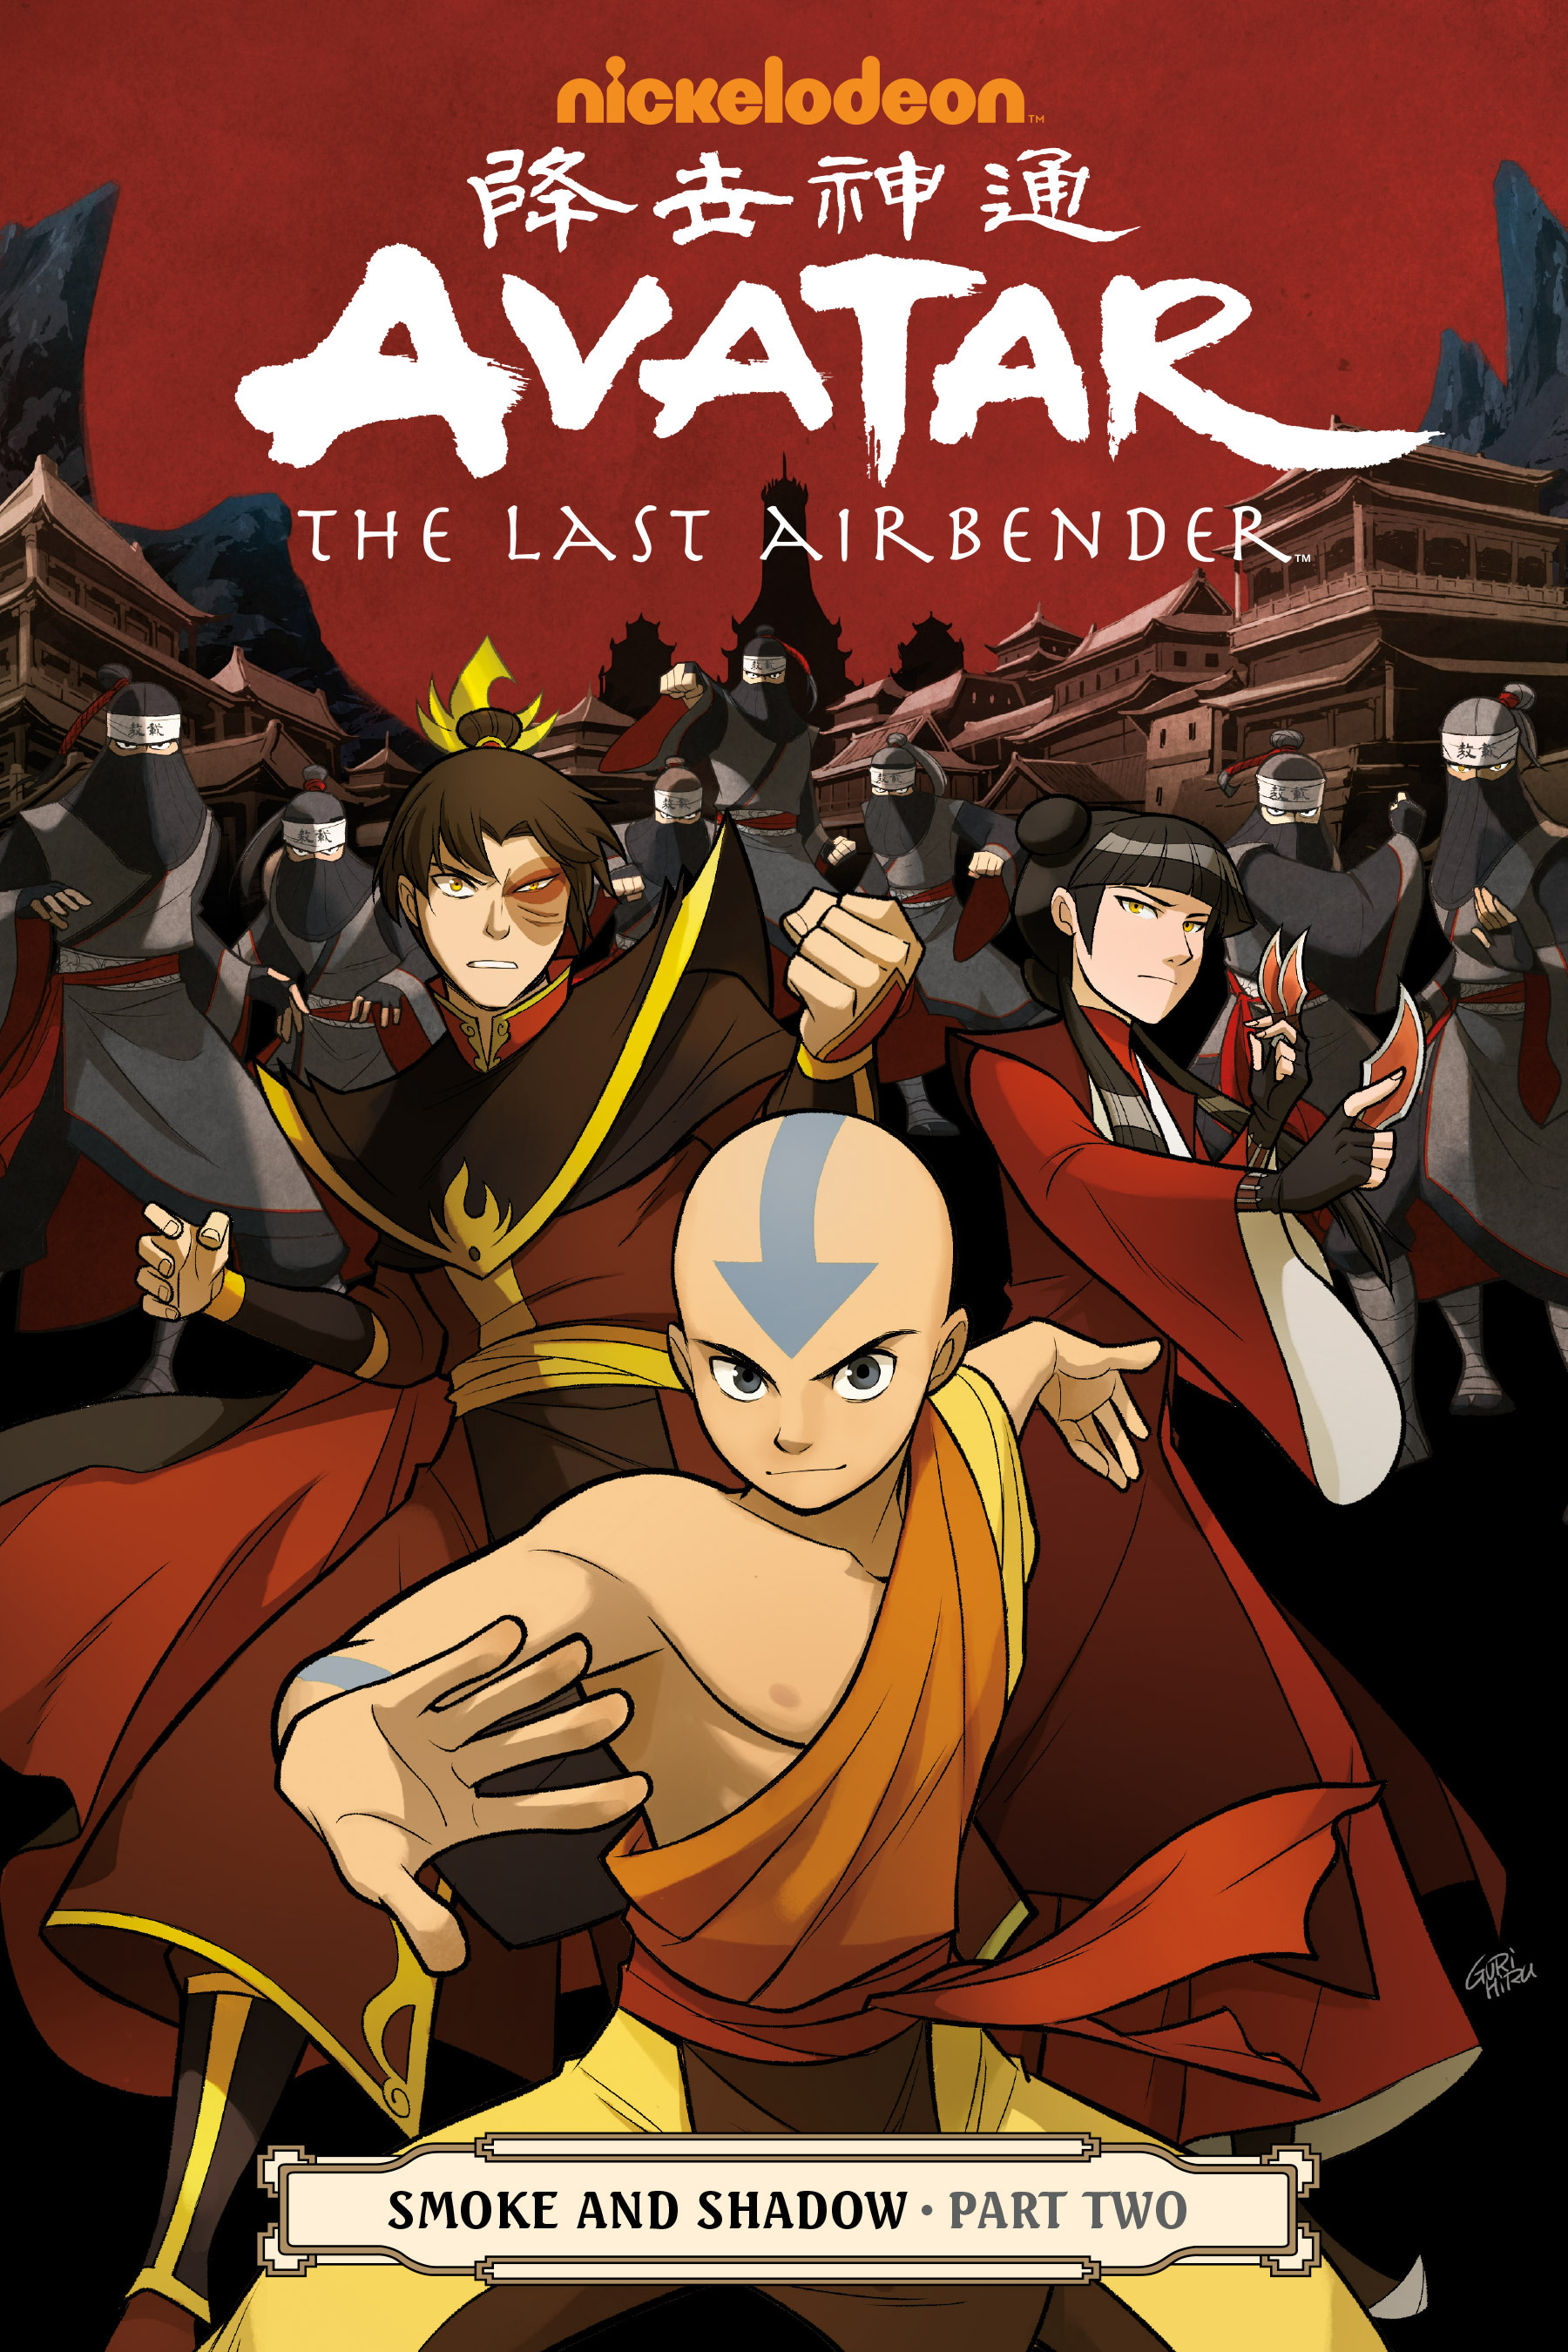 Read online Nickelodeon Avatar: The Last Airbender - Smoke and Shadow comic -  Issue # Part 2 - 1